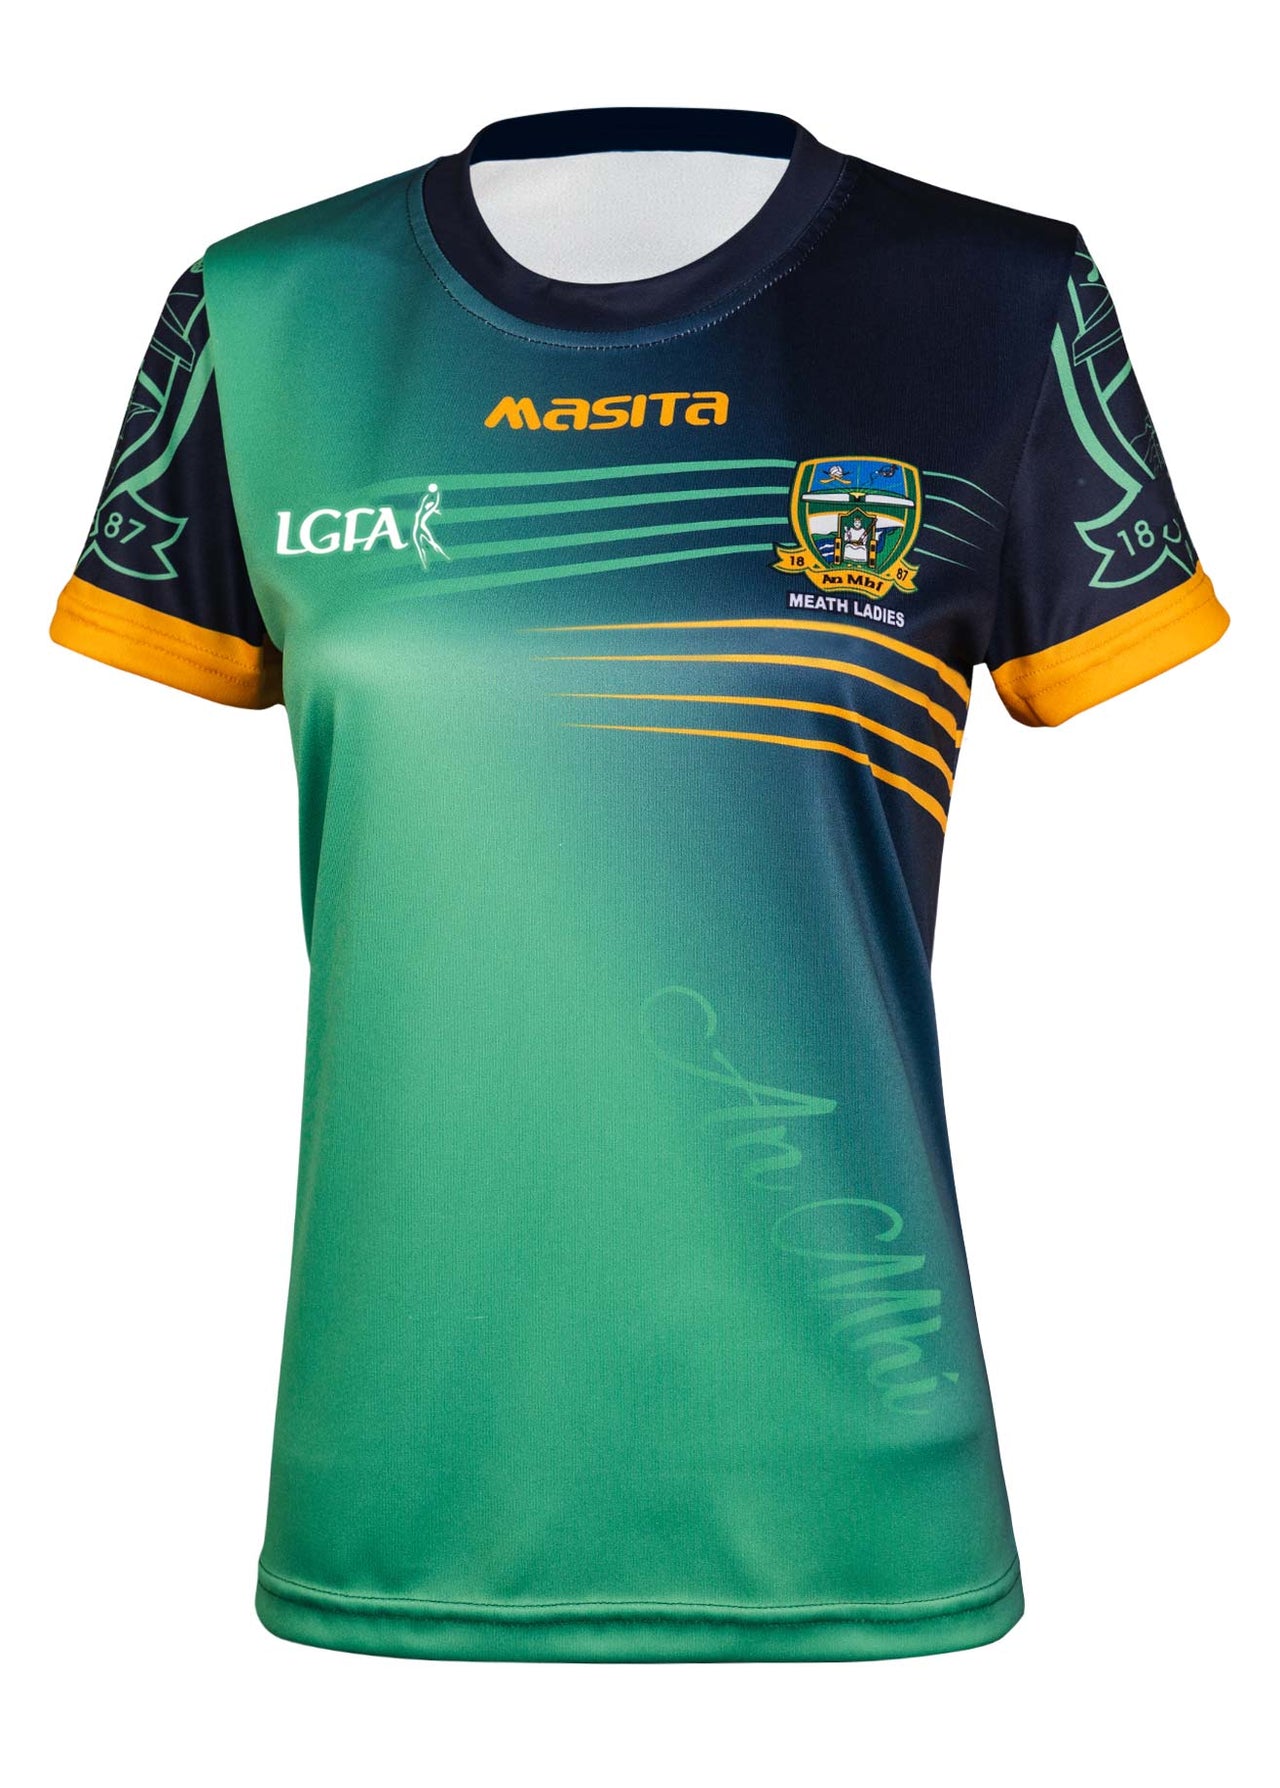 Meath Ladies Rio Green Casey Training Jersey Regular Fit Adult